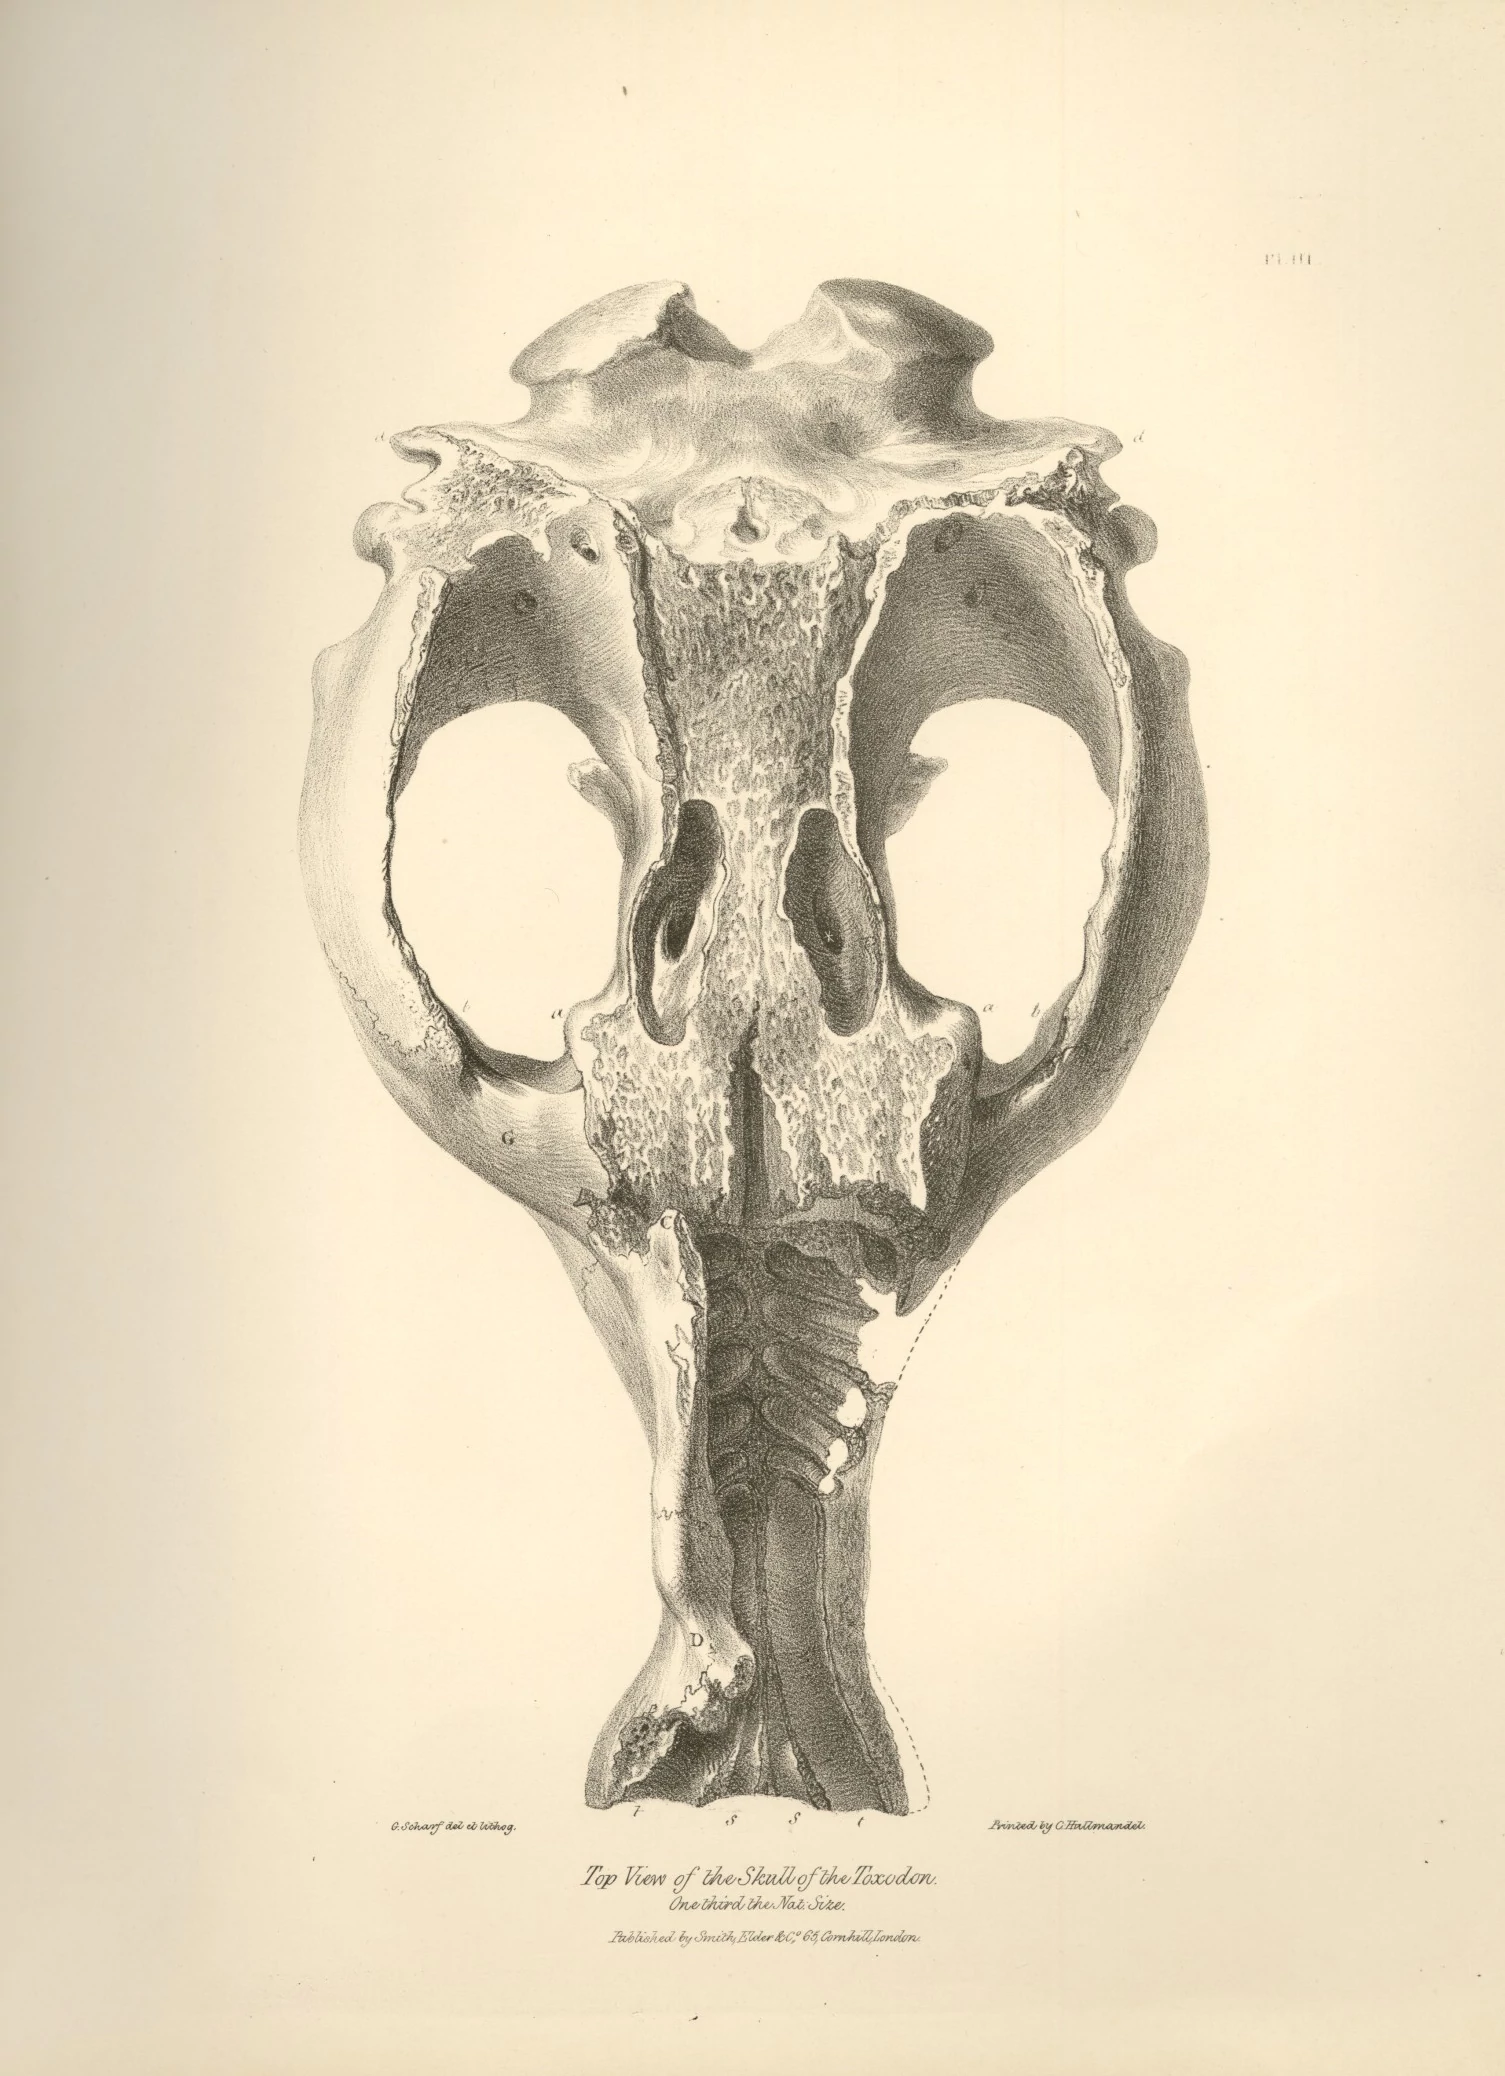 Top View of the Skull of Toxodon, Charles Darwin